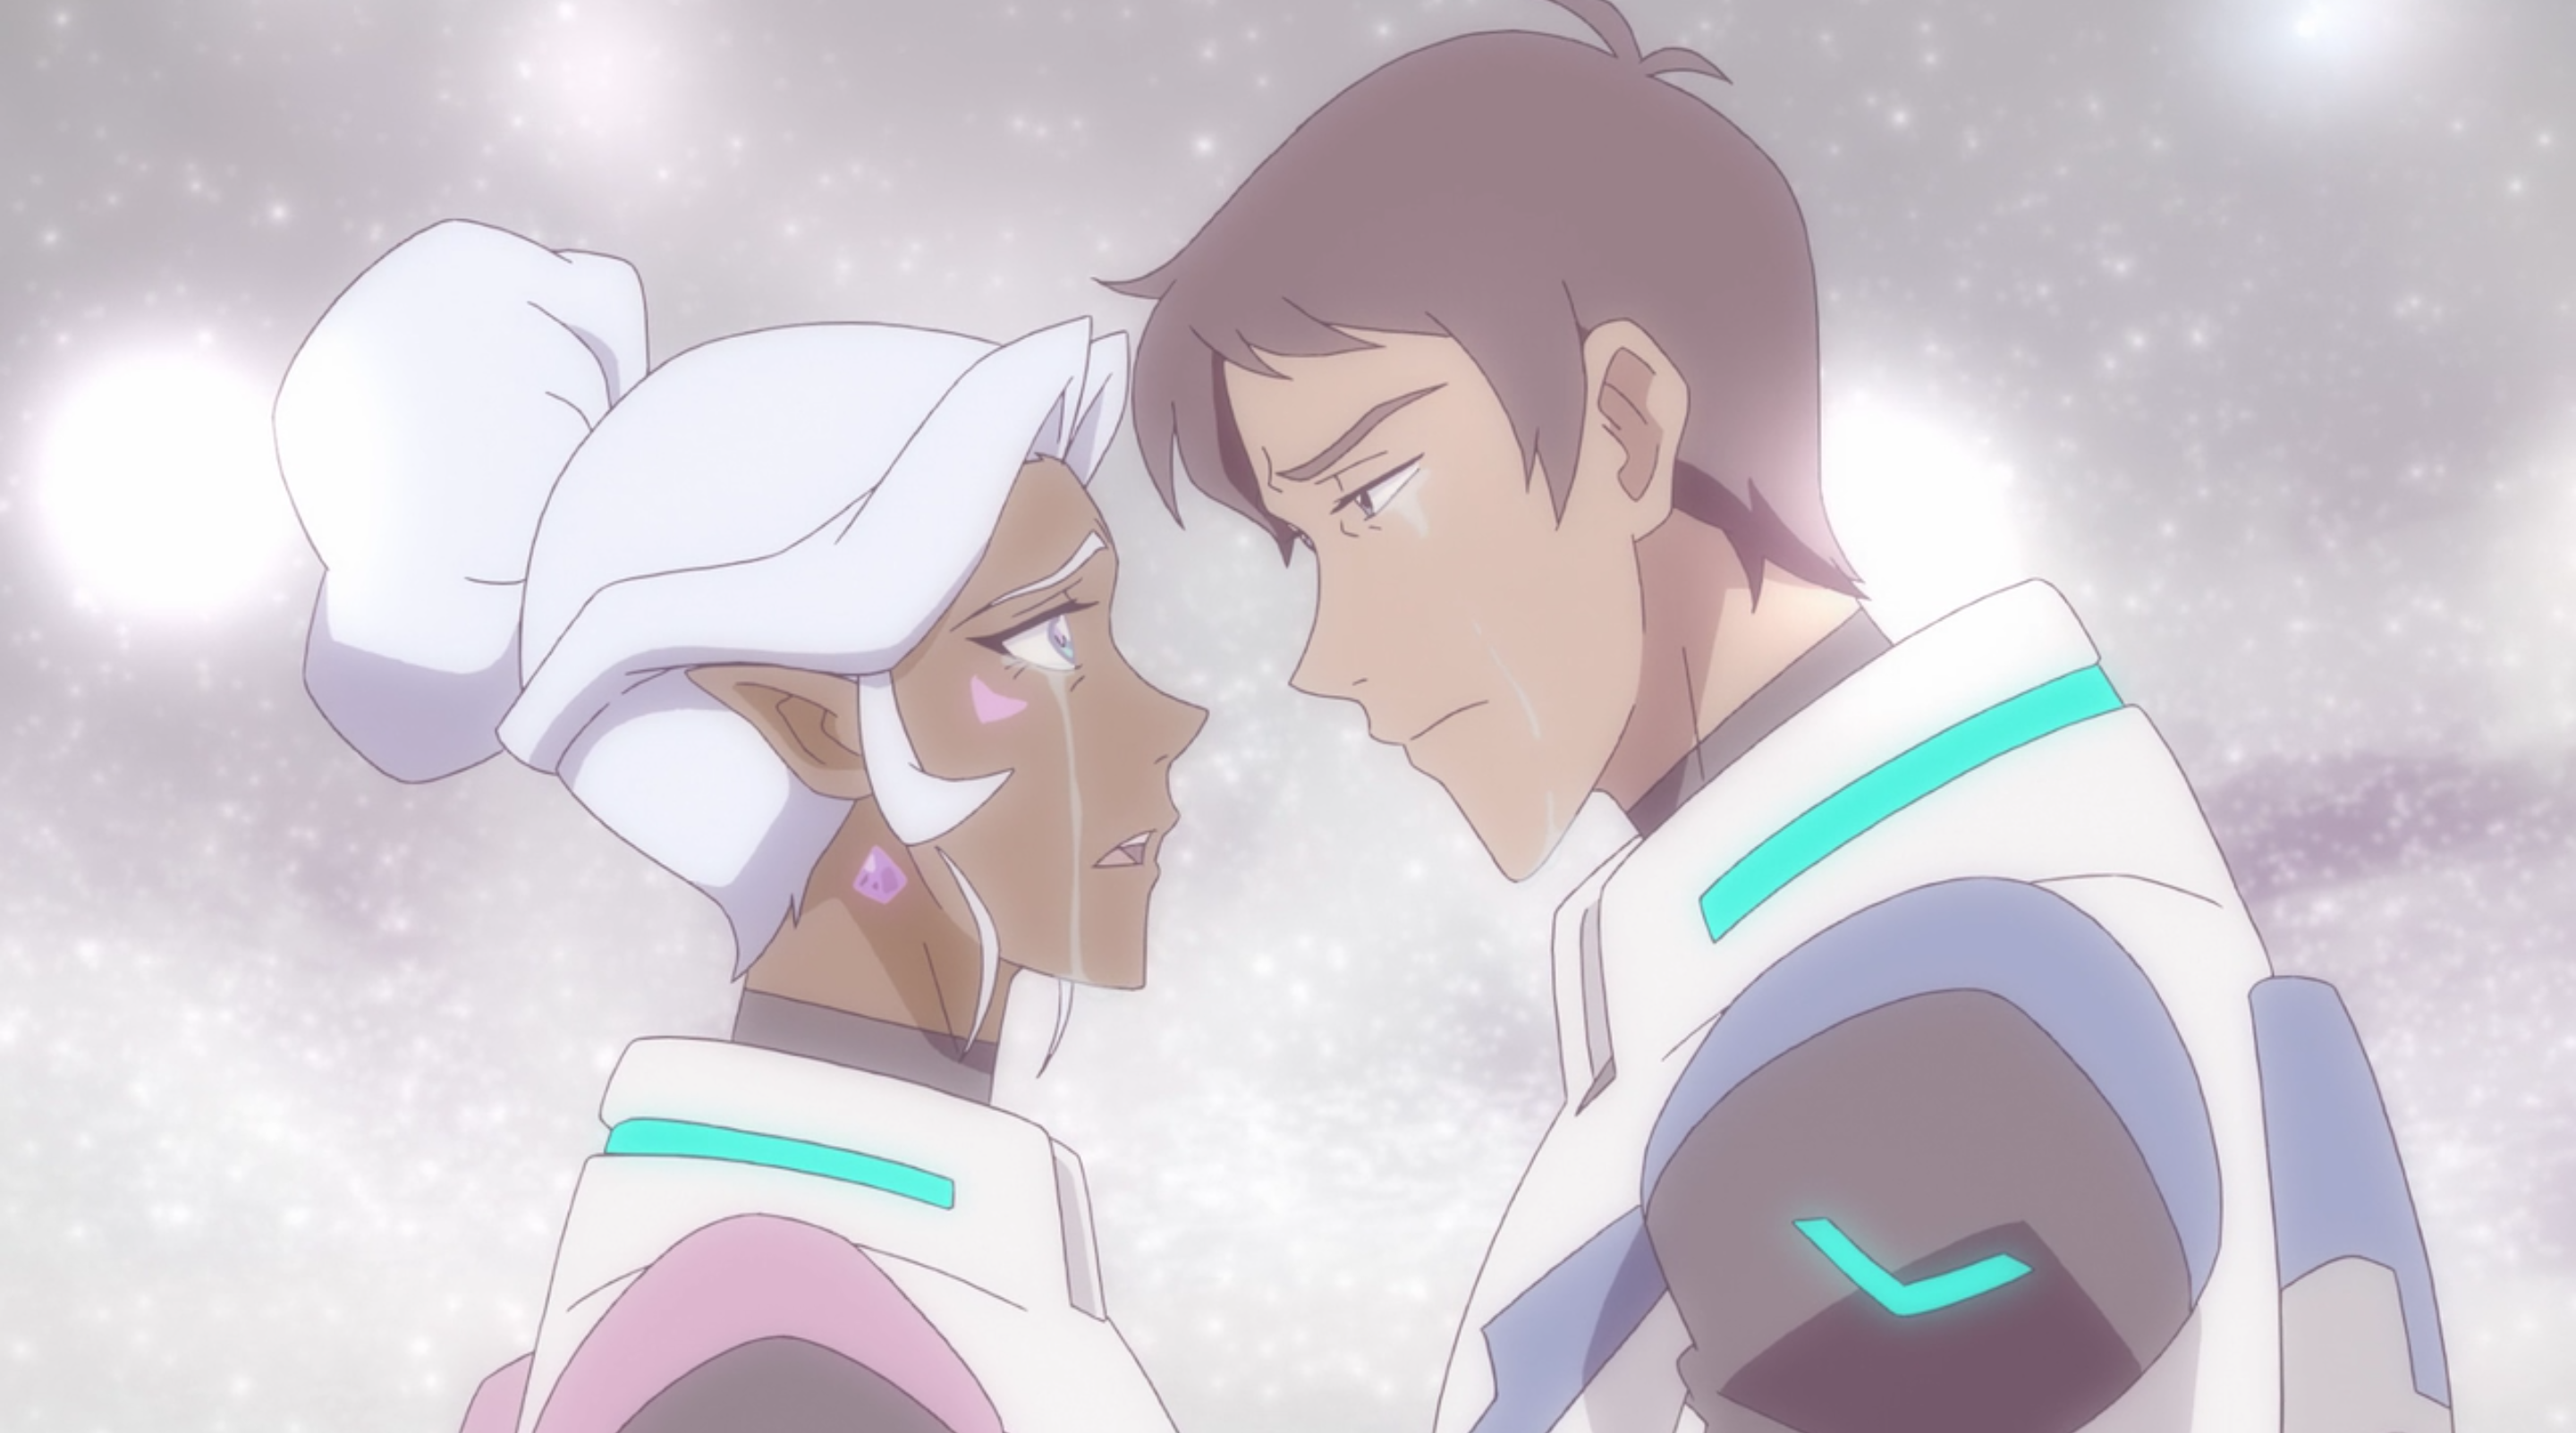 Lance and Allura share a heart-wrenching good-bye before Allura makes the ultimate sacrifice. 